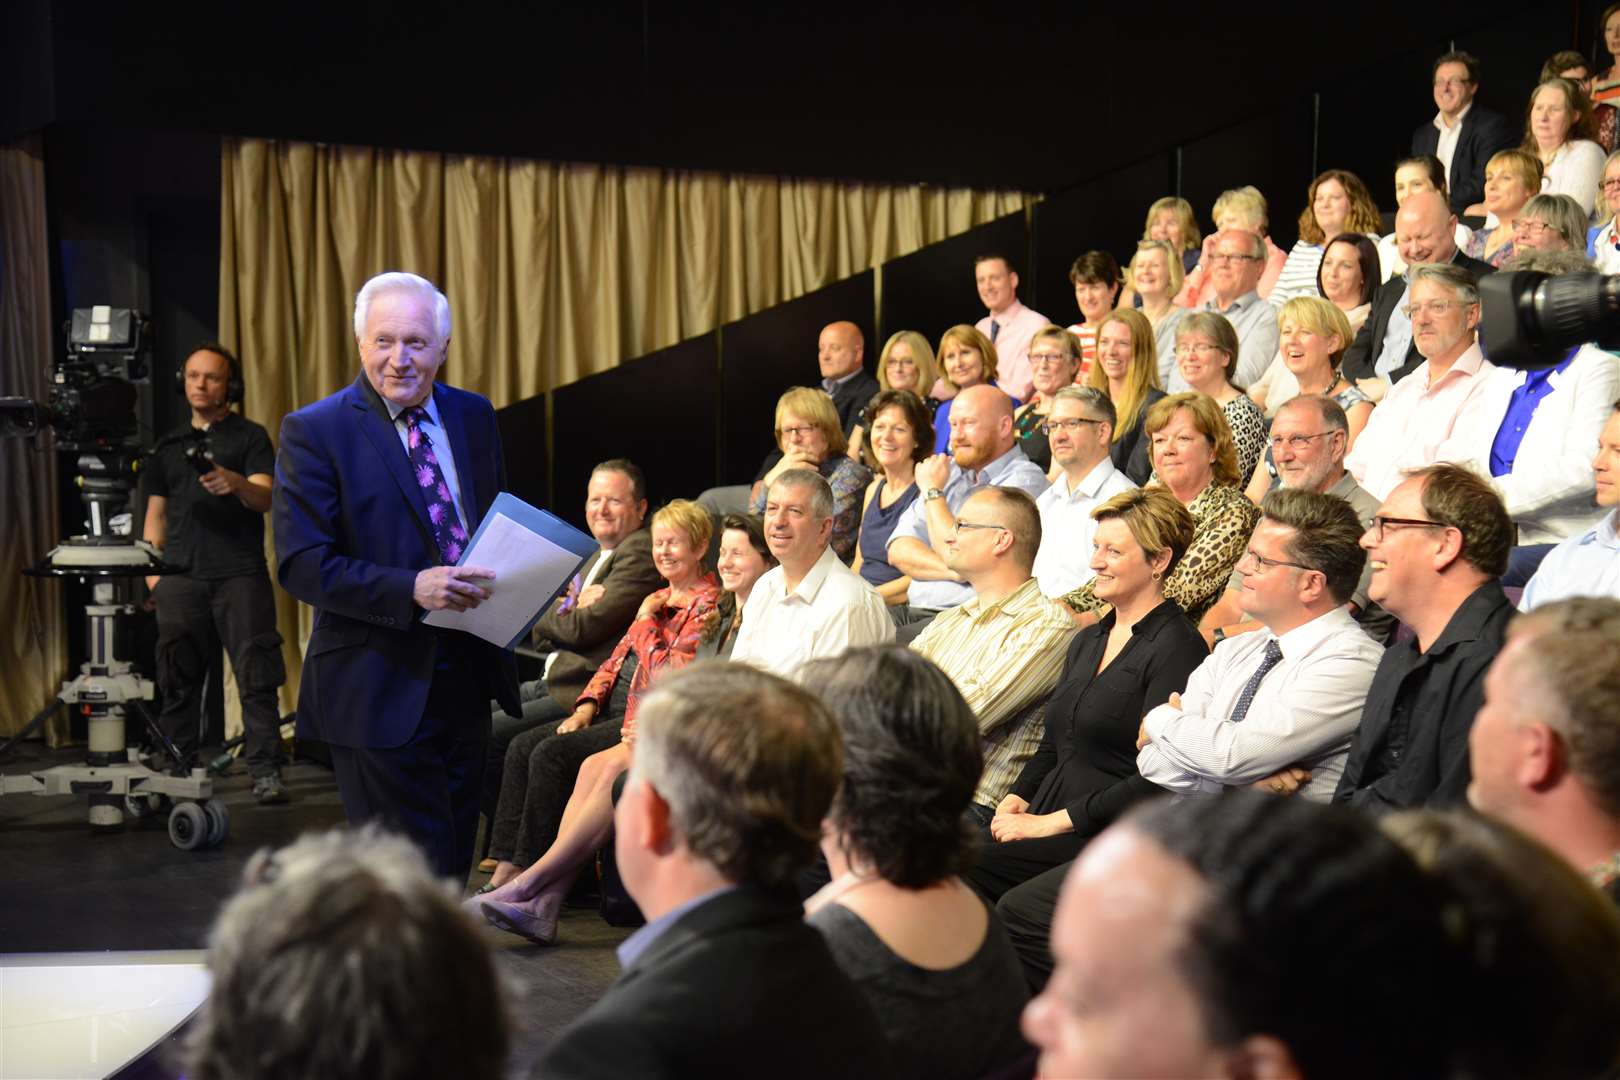 David Dimbleby and the audience at Question Time